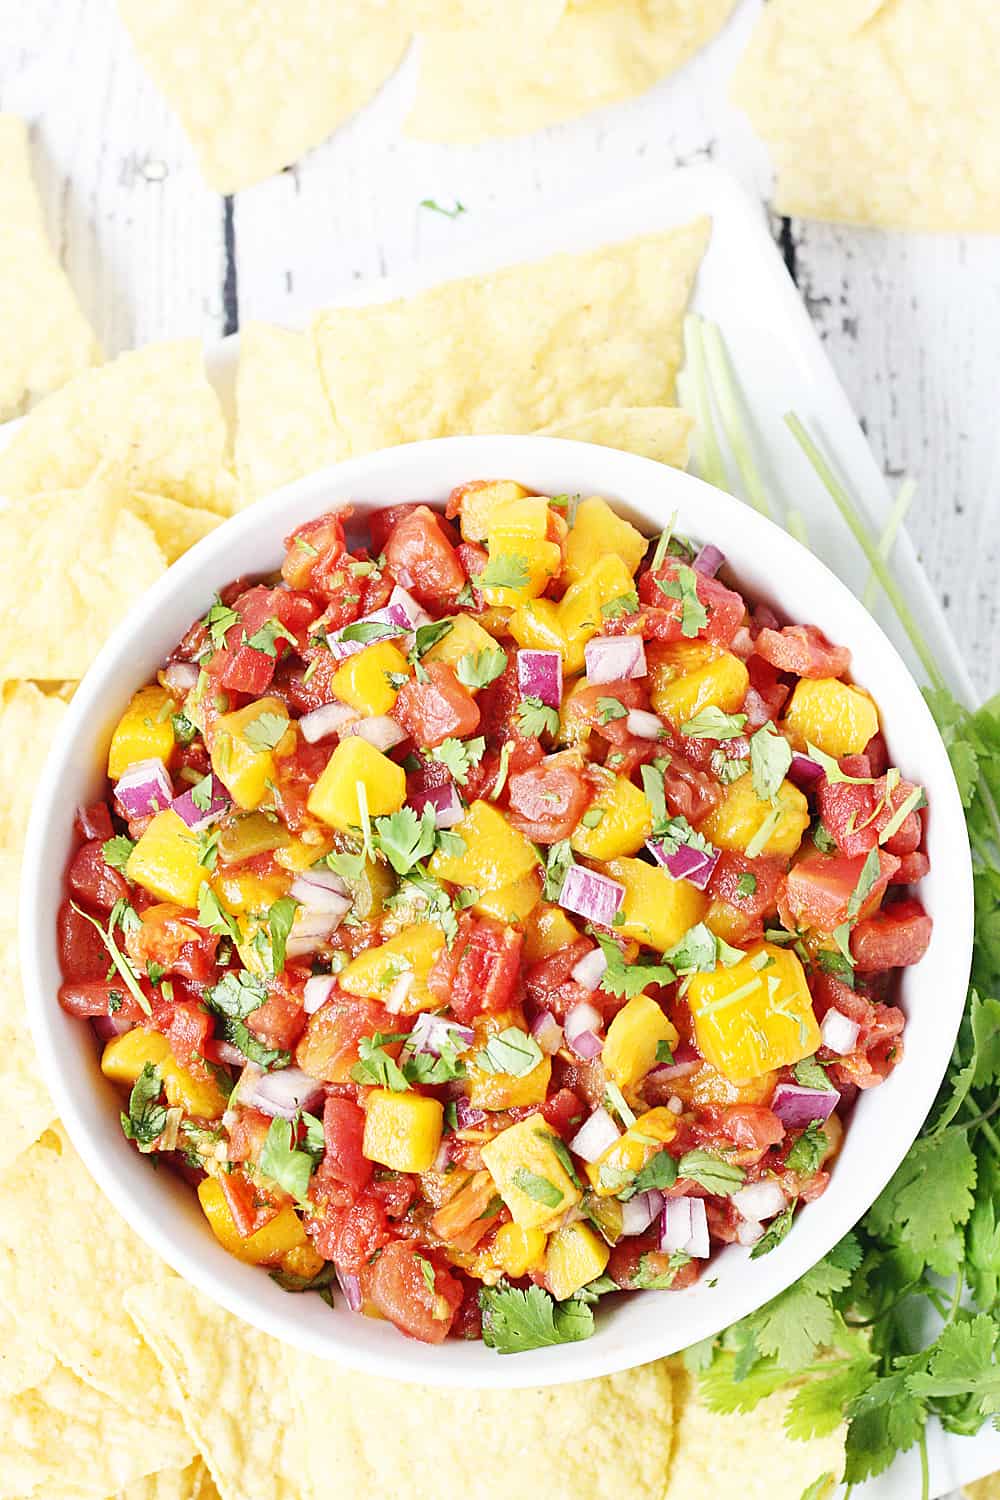 Easy Mango Salsa -- This easy mango salsa recipe comes together in about five minutes and requires only a handful of ingredients. You can serve it immediately, which makes it a great last-minute Cinco de Mayo appetizer! #salsa #appetizer #cincodemayo #mexicanrecipe #mexican #mango #easyrecipe #halfscratched